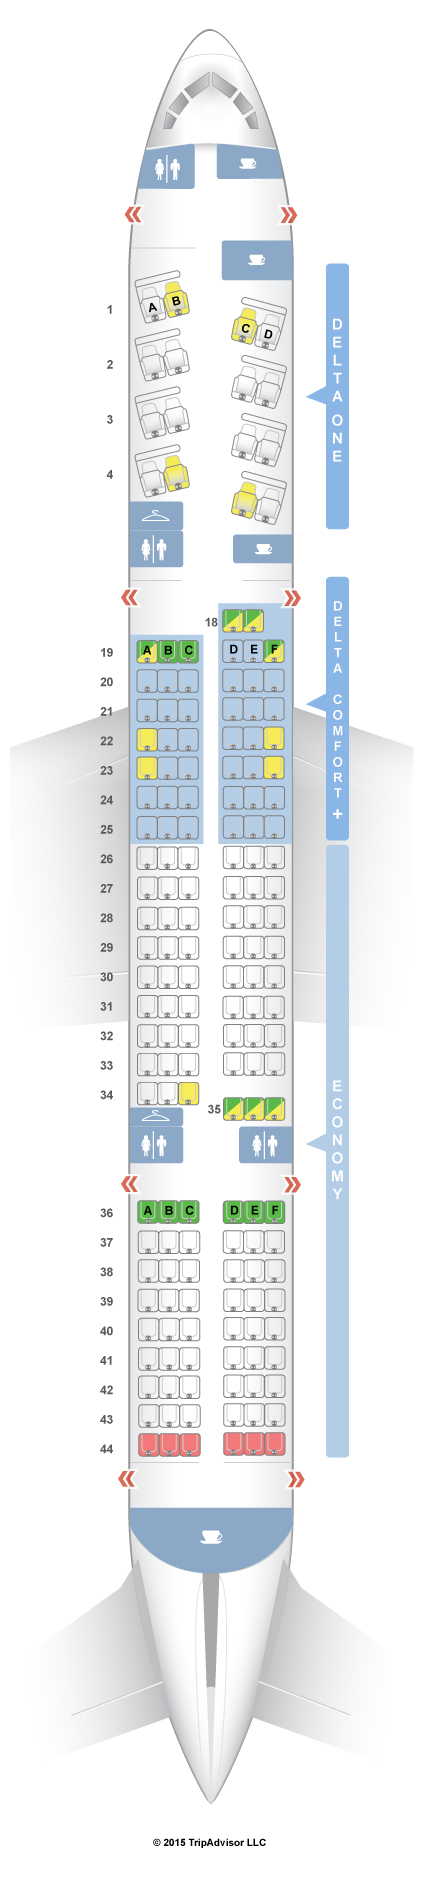 Delta 757 Seating Chart